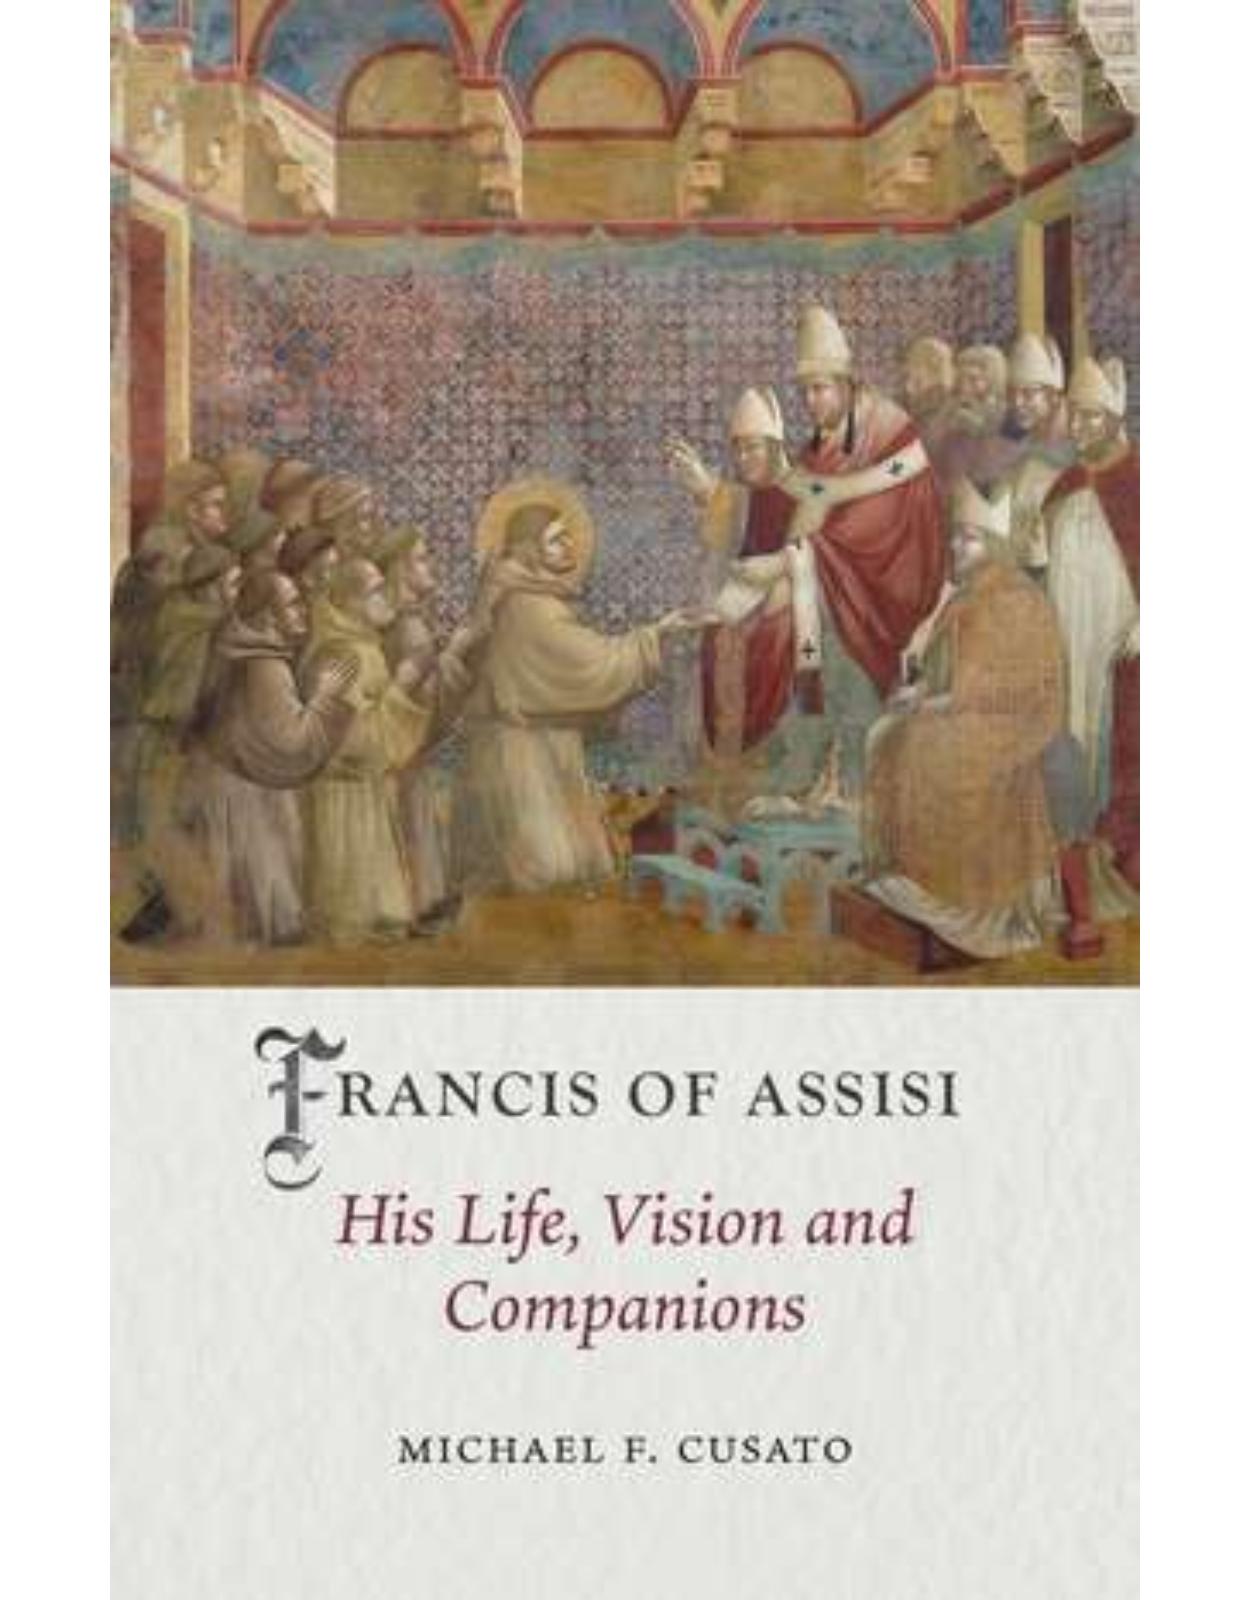 Francis of Assisi: His Life, Vision and Companions: Medieval Lives